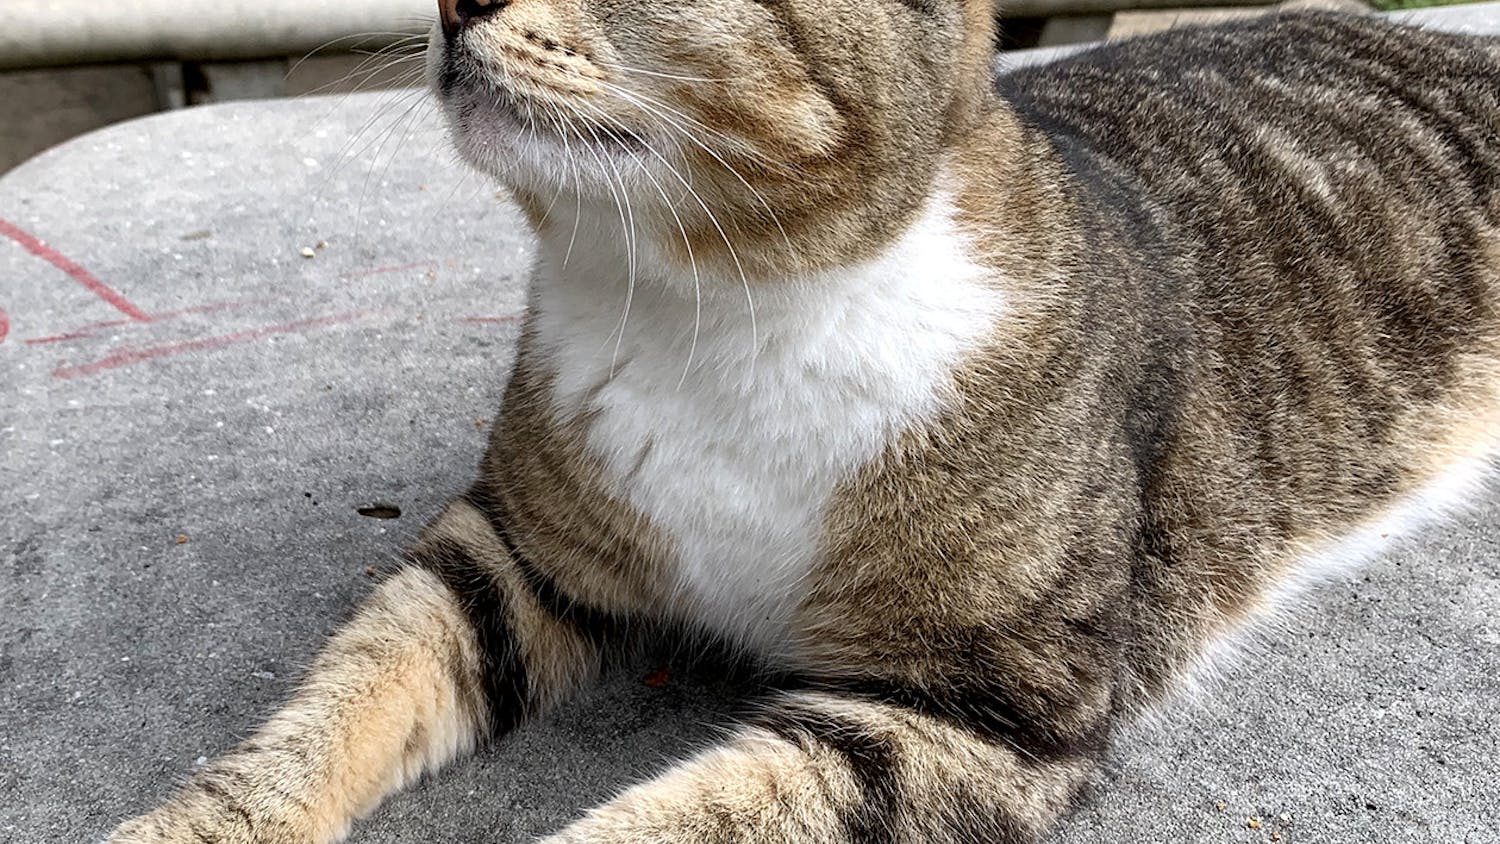 Tenders, one UF’s campus cats, gazes upward as she sits on a table in the Tolbert Area.